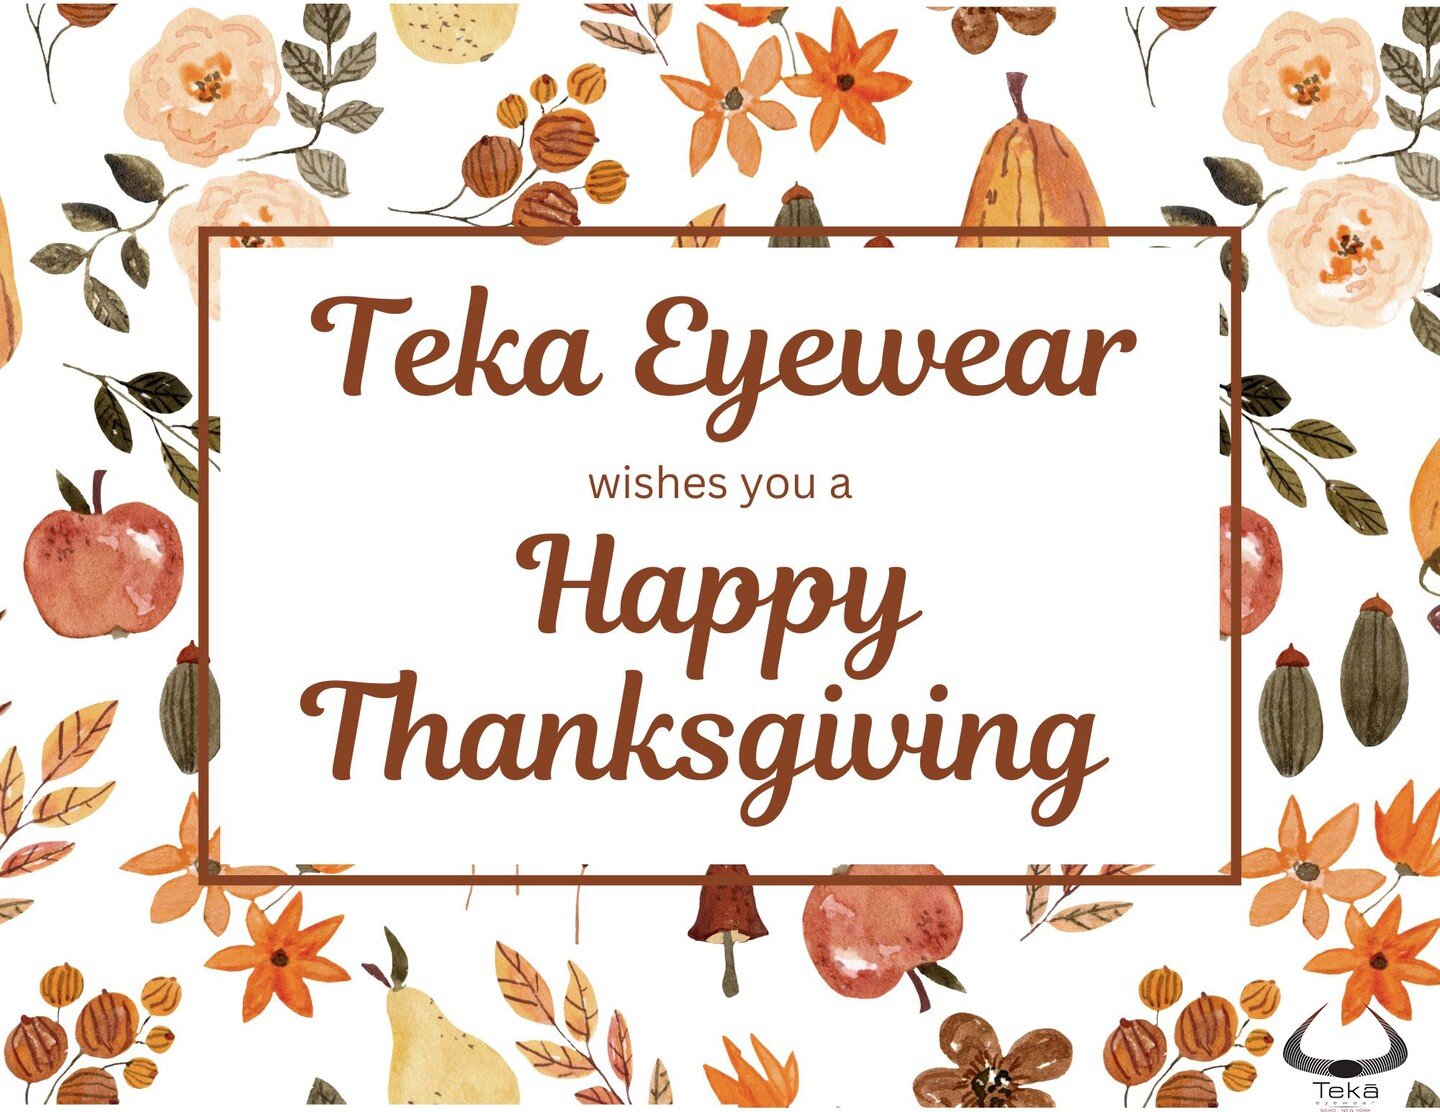 Teka Eyewear would to like to extend our warmest wishes to everyone during the Thanksgiving holiday! We will be closed tomorrow, November 24th and will reopen on Friday, November 25th.
We hope everyone has a safe, happy, and healthy holiday! 🦃🧡